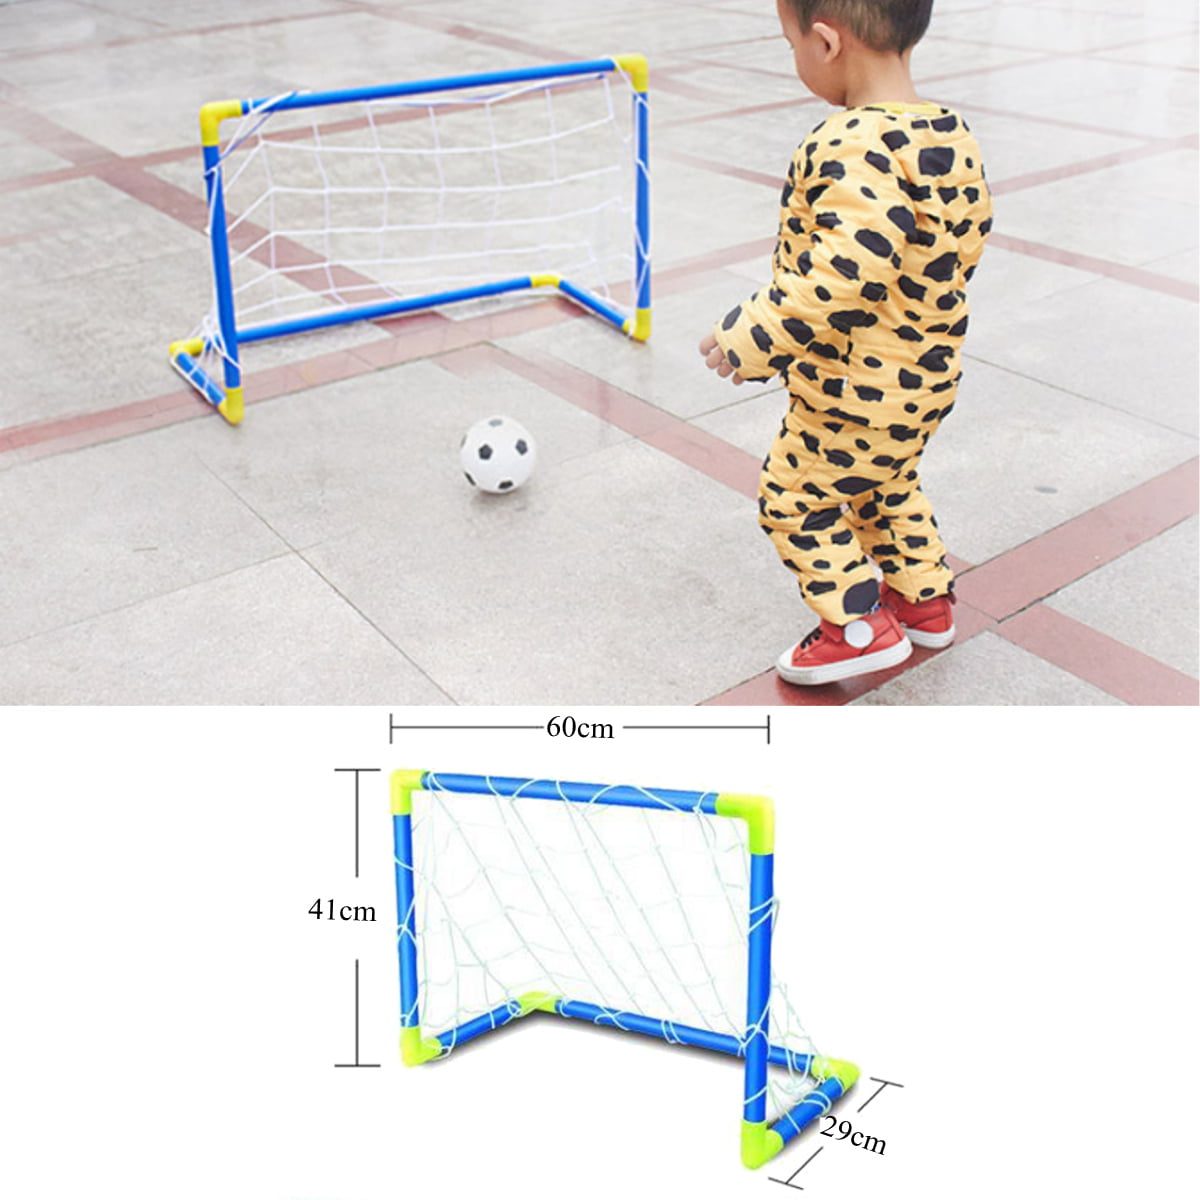 Toddler Mini Soccer Goal Net For Outdoor Backyard / Indoor Toddlers 4 Stakes and Children and Carry Case Juego de Futbol para Niños Soccer Goal Net Play Set for Kids Includes Soccer Ball 